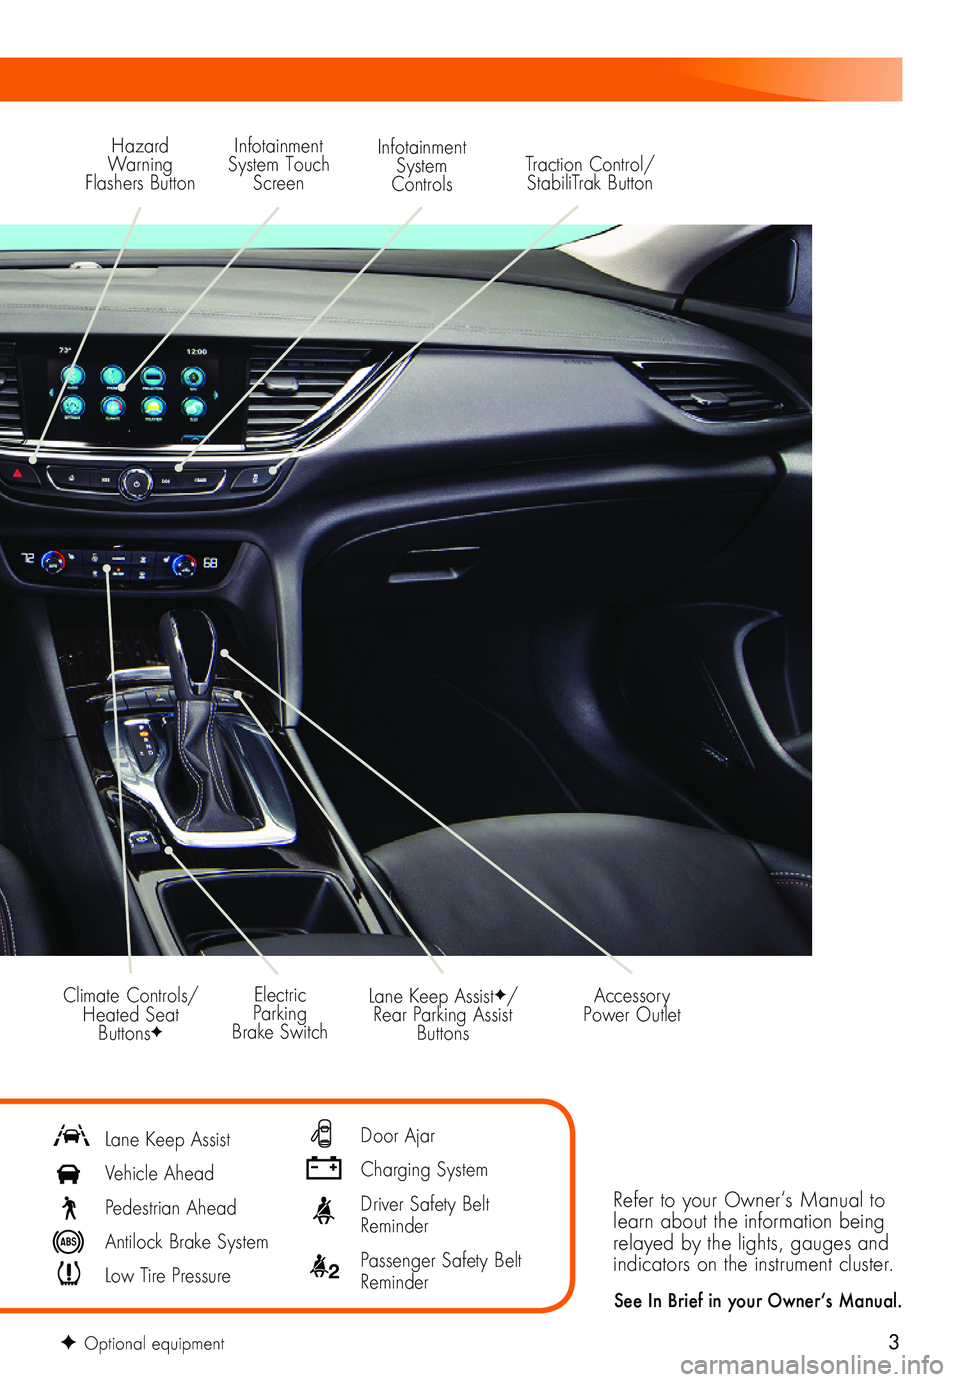 BUICK REGAL SPORTBACK 2018  Get To Know Guide 3
Refer to your Owner‘s Manual to learn about the information being relayed by the lights, gauges and indicators on the instrument cluster.
See In Brief in your Owner‘s Manual.
Hazard Warning Flas